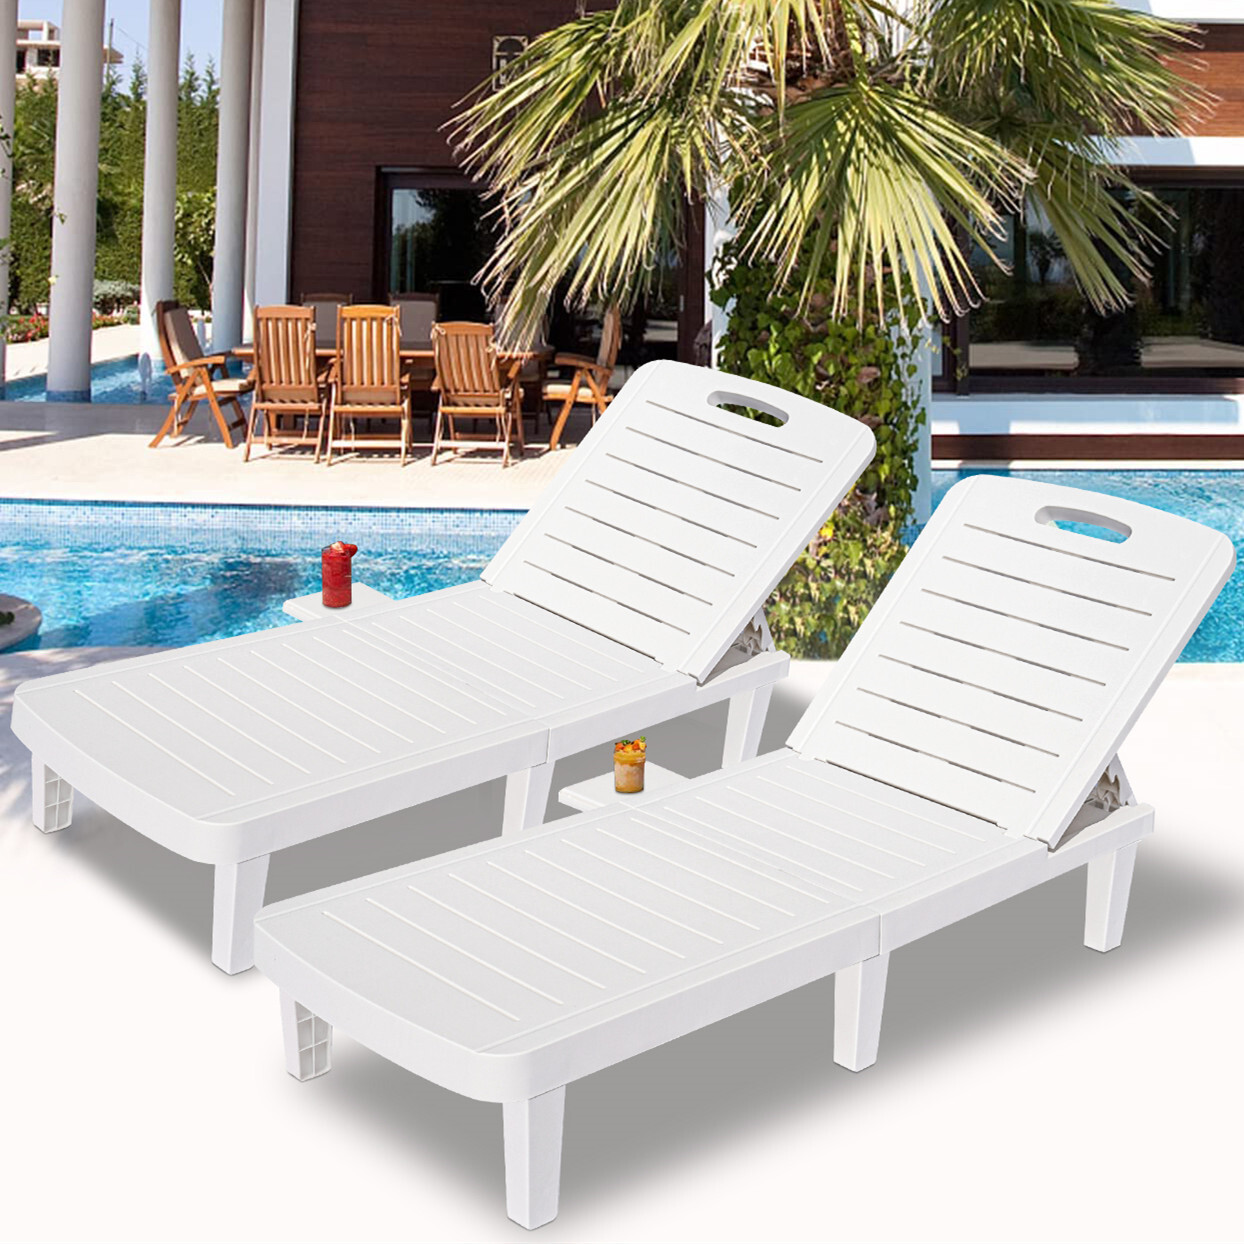 2 Piece Chaise Lounge Chairs, Patio Furniture Patio Chaise Lounge Chair with Adjustable Backrest and Retractable Tray, Plastic Reclining Lounge Chair for Beach, Backyard, Garden, Poolside, L4552 - image 1 of 10